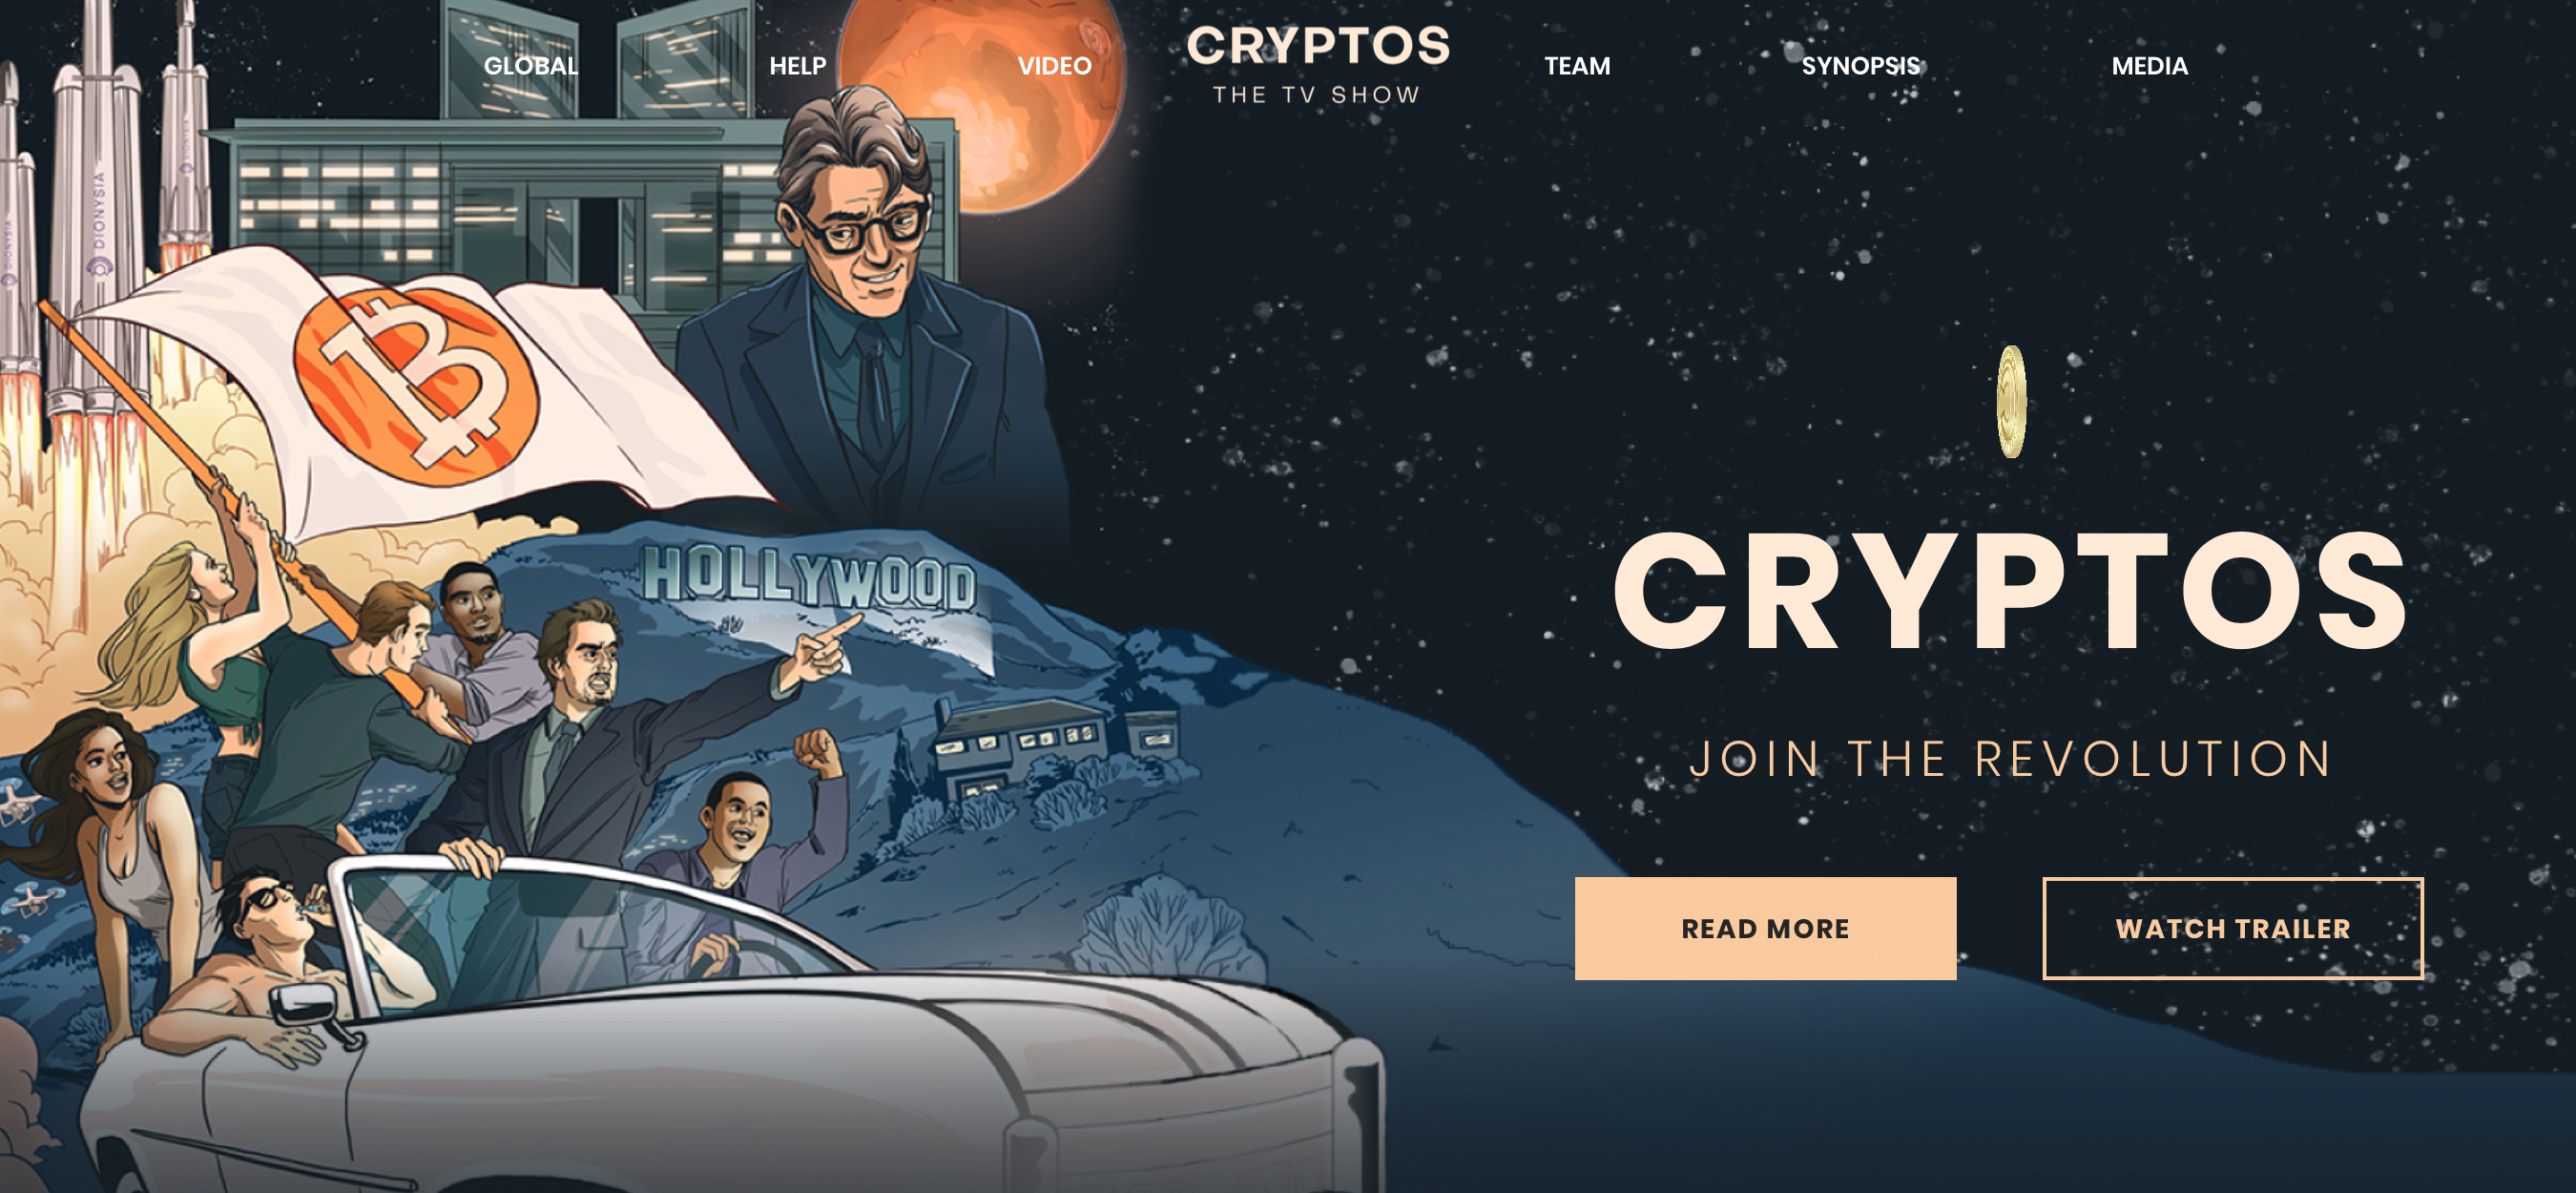 Hollywood Actor Kevin Connolly Directs New Television Pilot 'Cryptos'